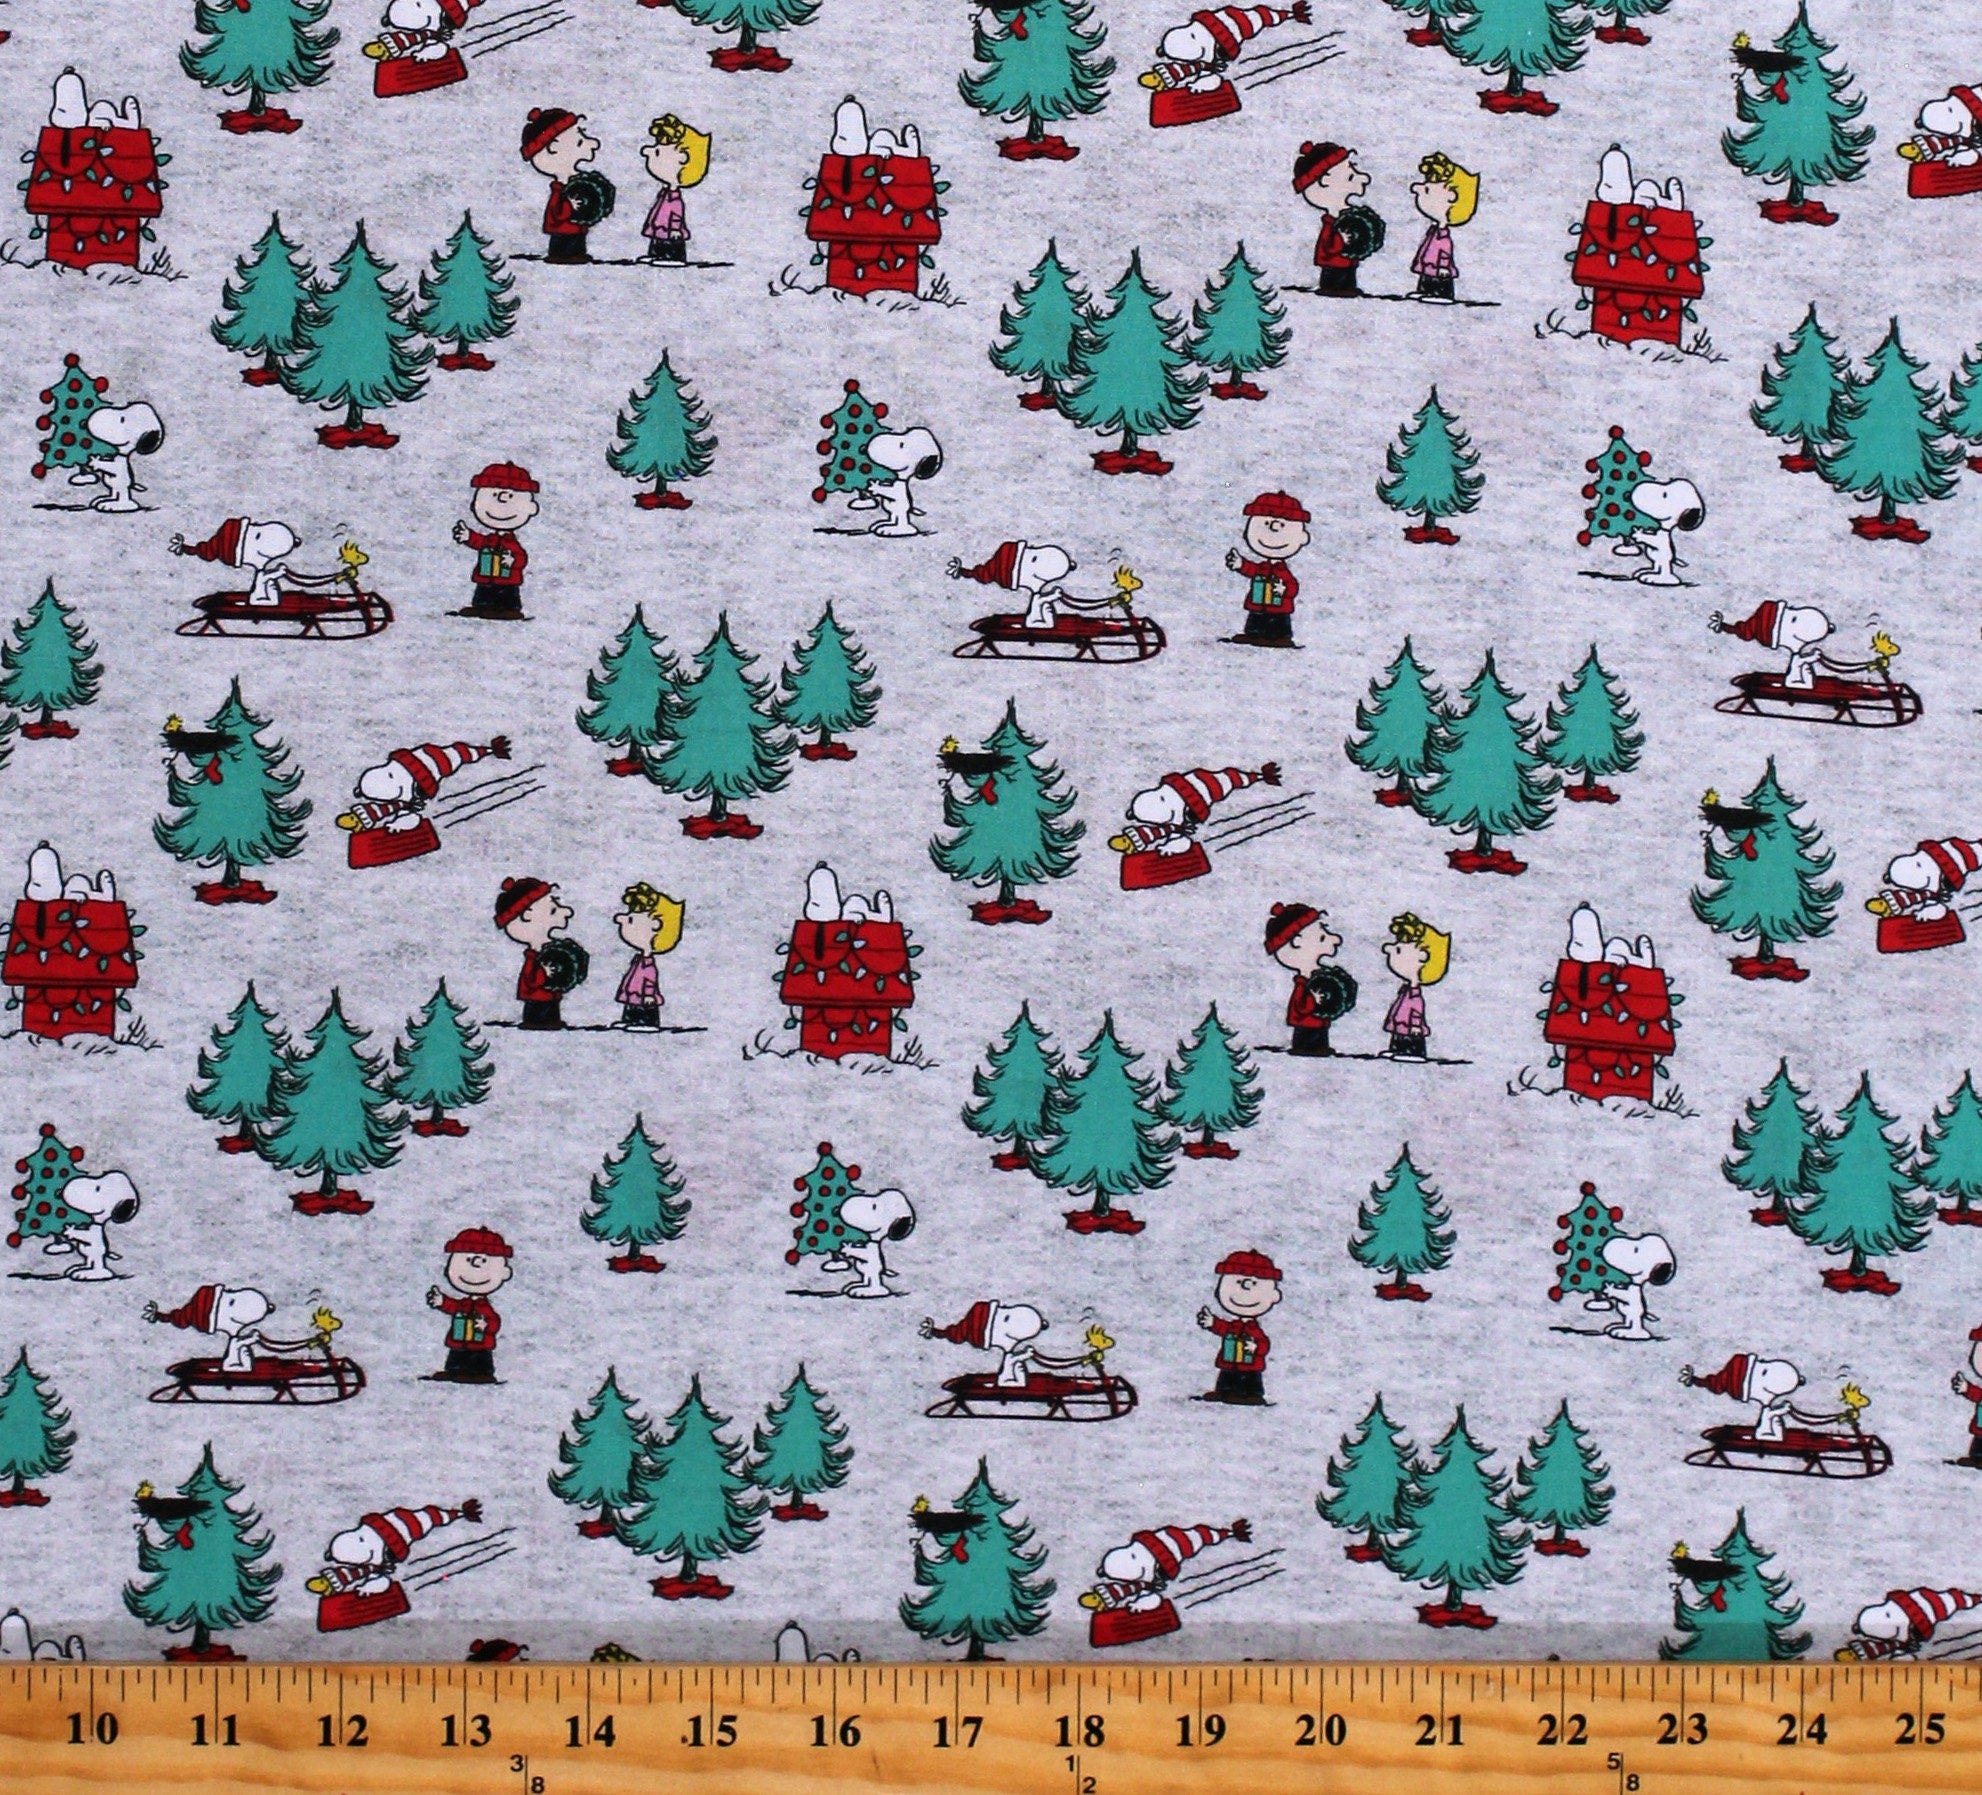 Cotton Peanuts Christmas Charlie Brown Snoopy Woodstock Sally Christmas Trees Sleds Kids Gray Cotton Fabric Print by the Yard D403.38